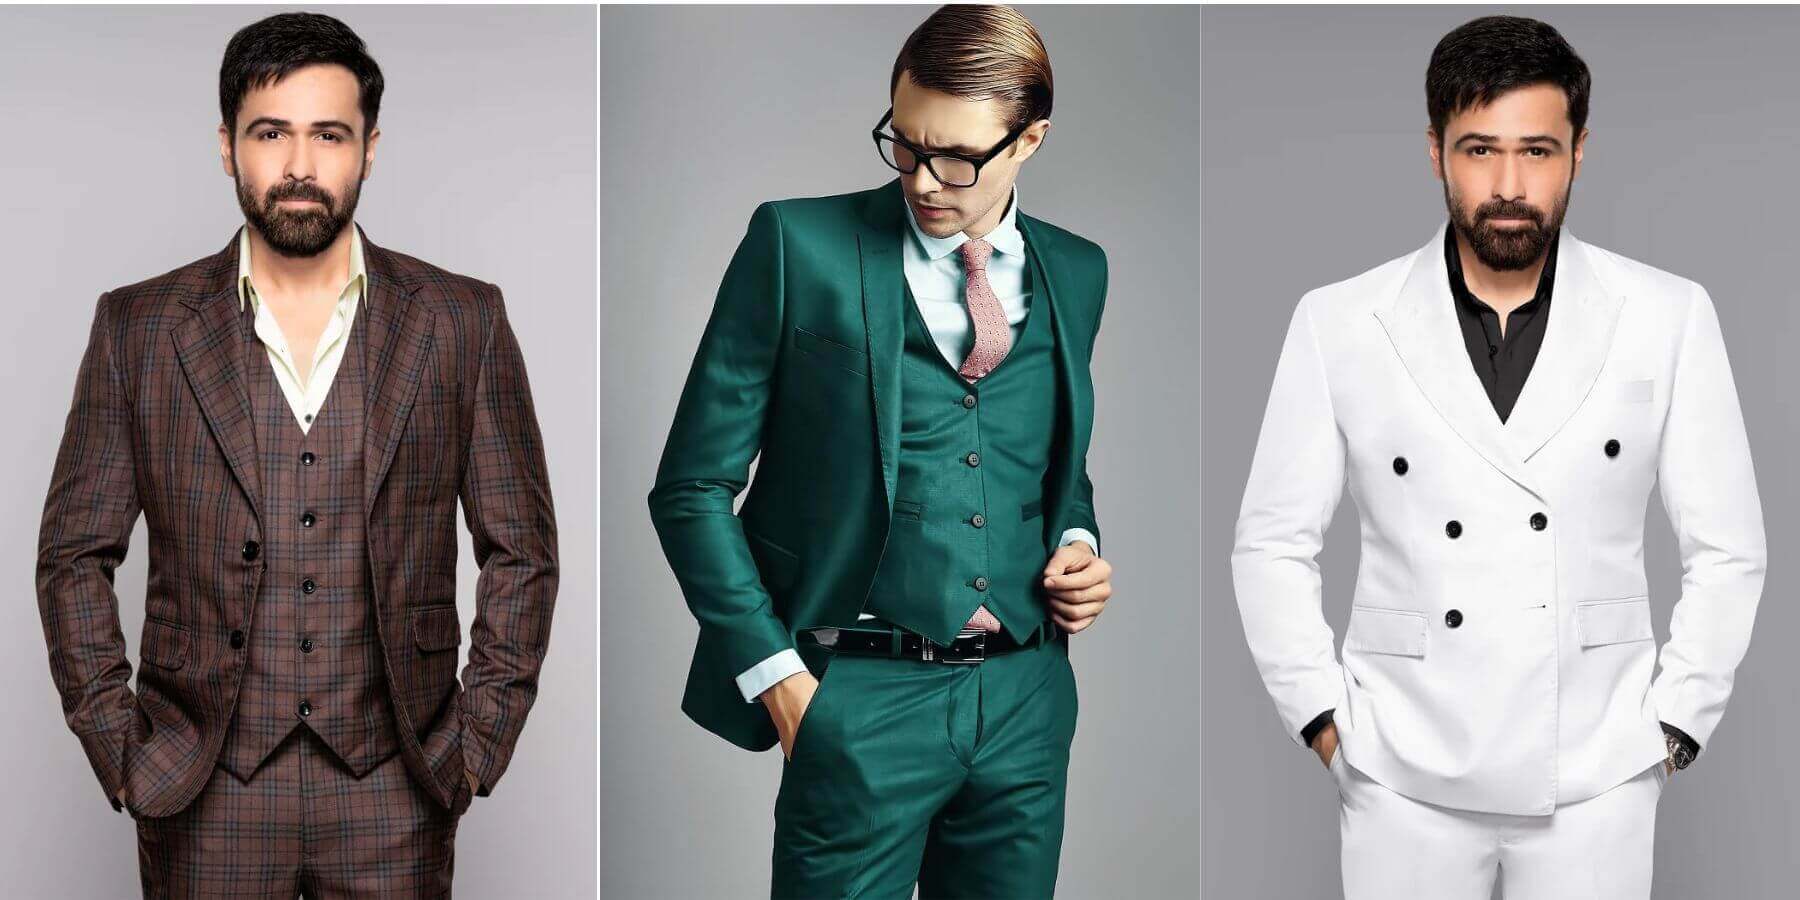 Top 10 Monochrome Outfit Ideas & Tips For Men